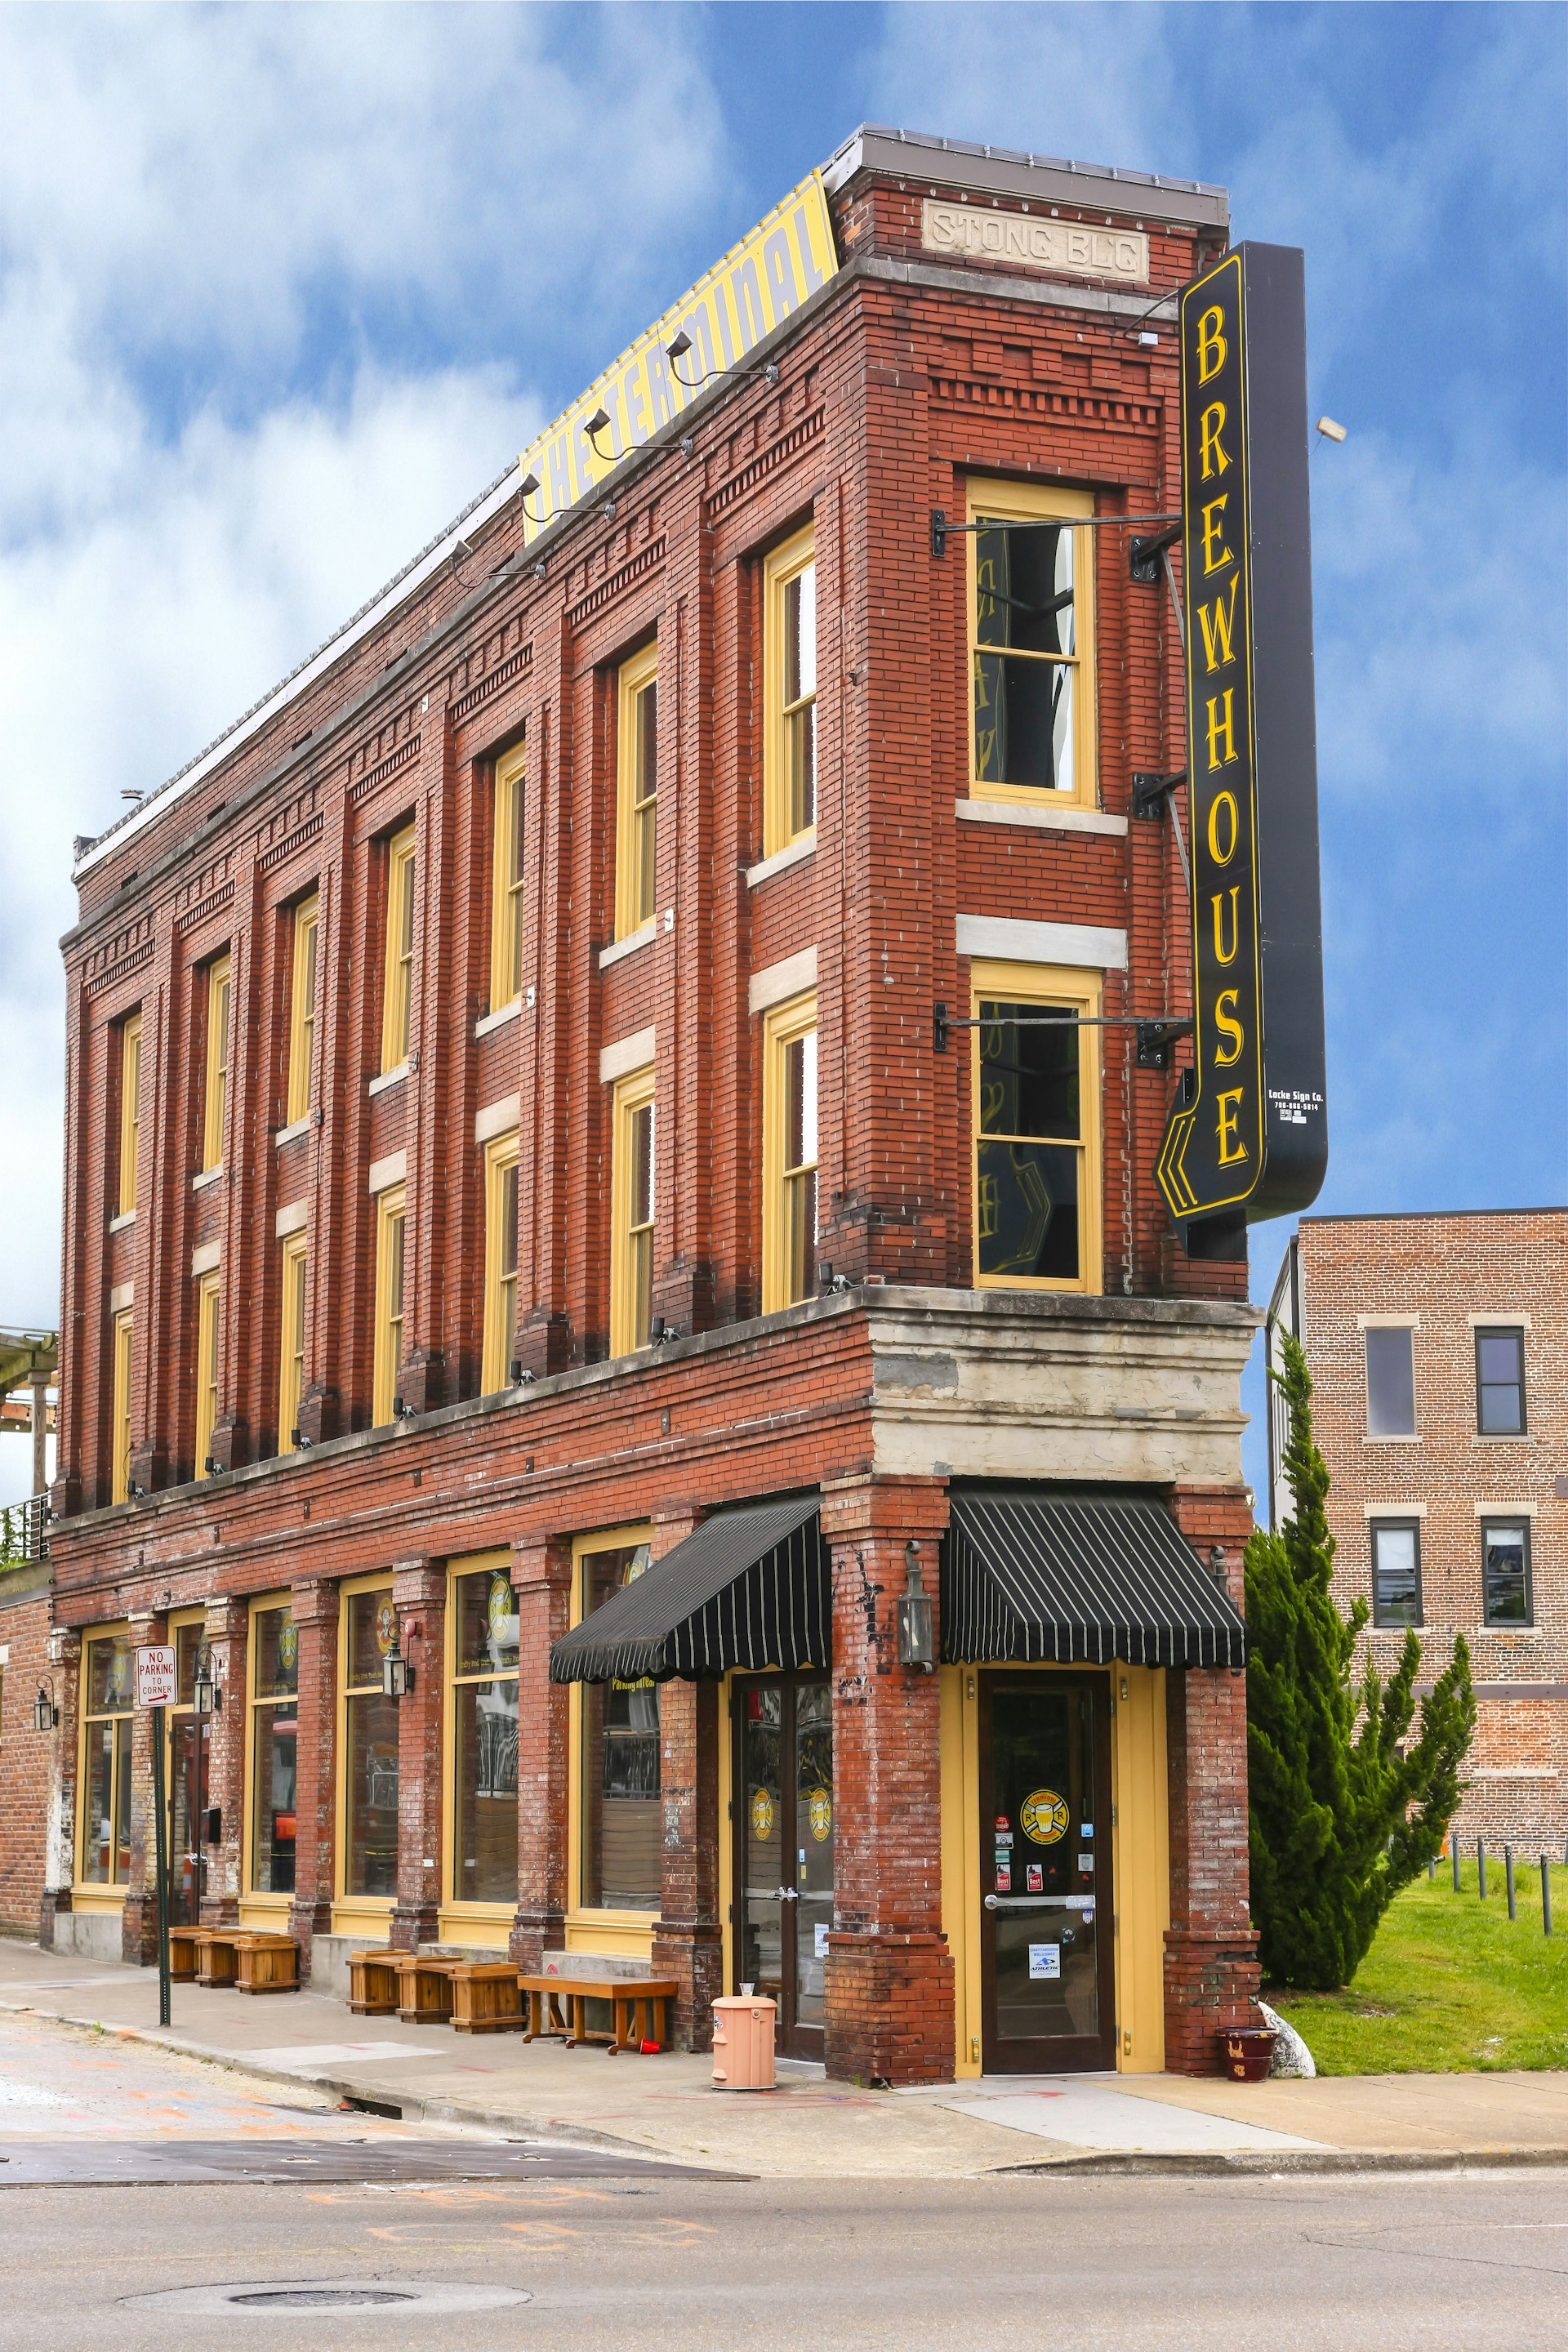 The Terminal Brewhouse pub and restaurant in Chattanooga, TN